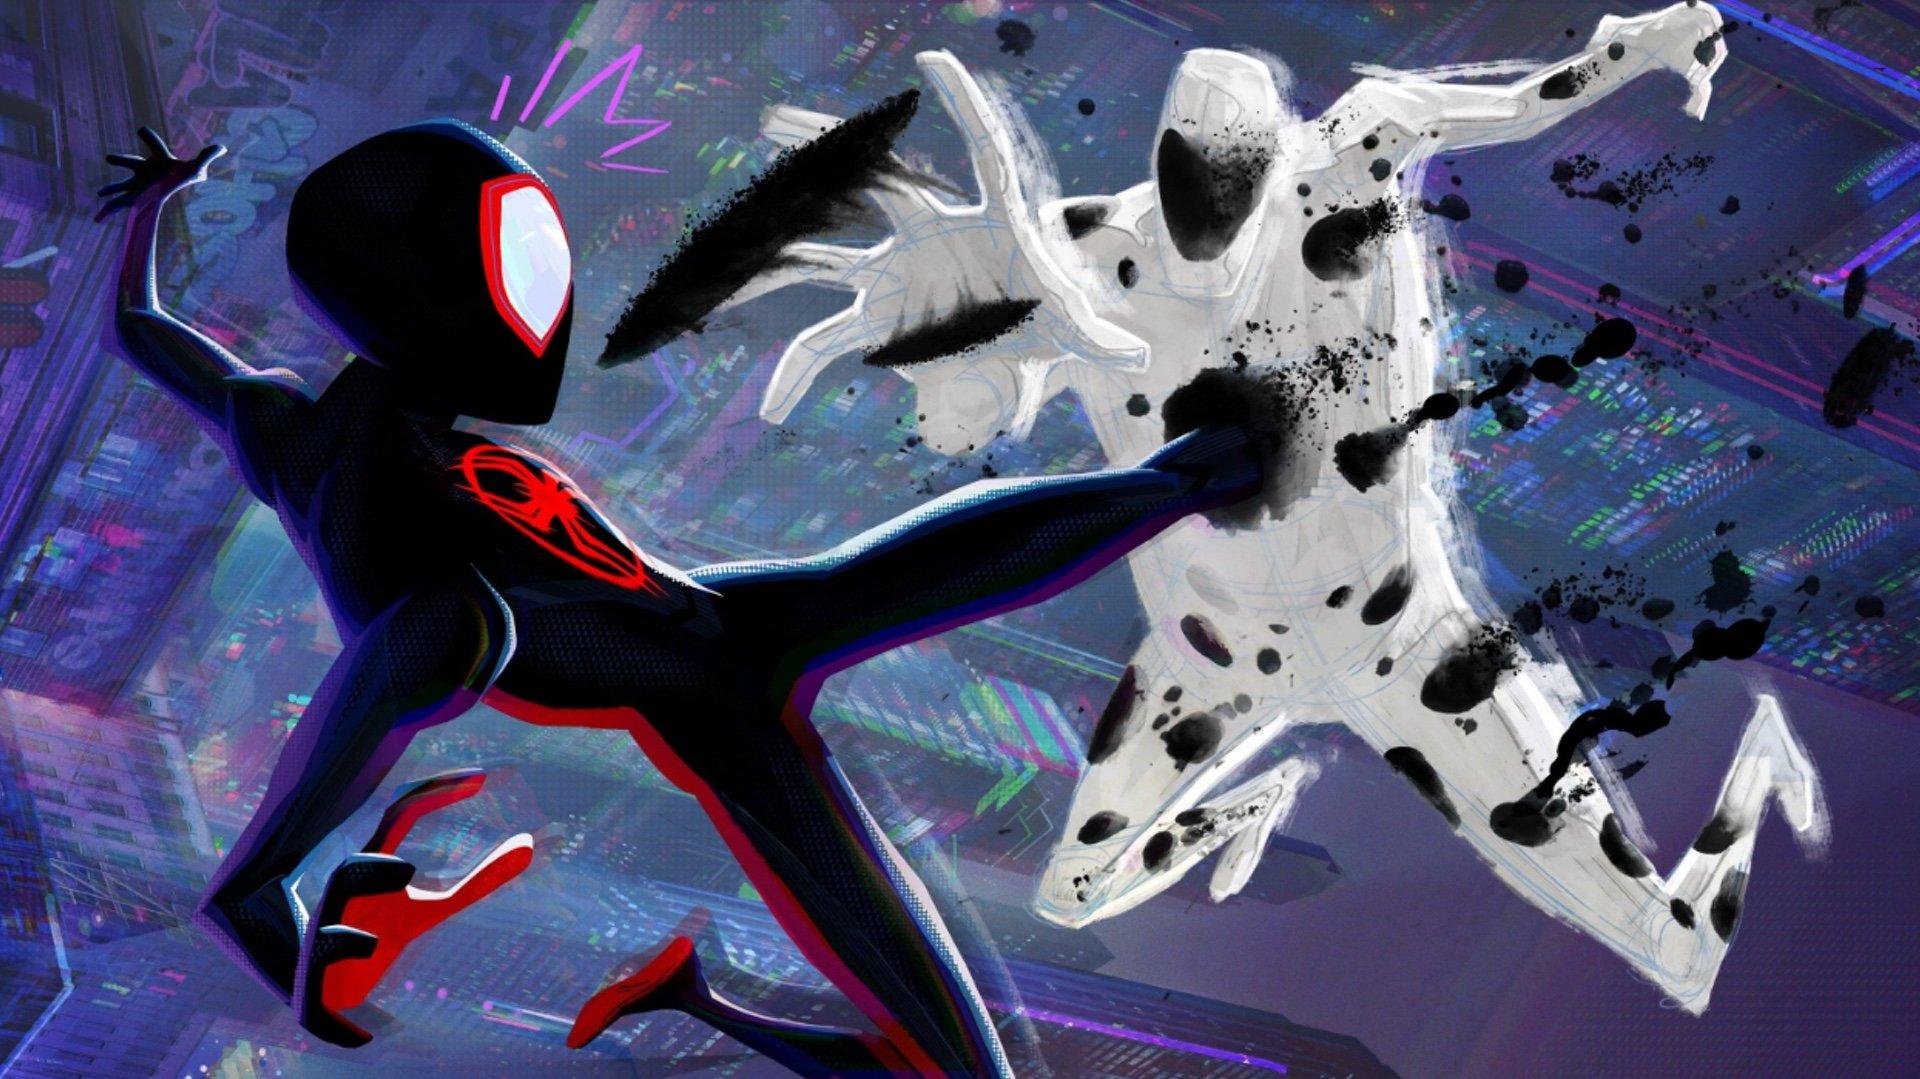 Spider Man Across The Verse Poster Art Image Featuring